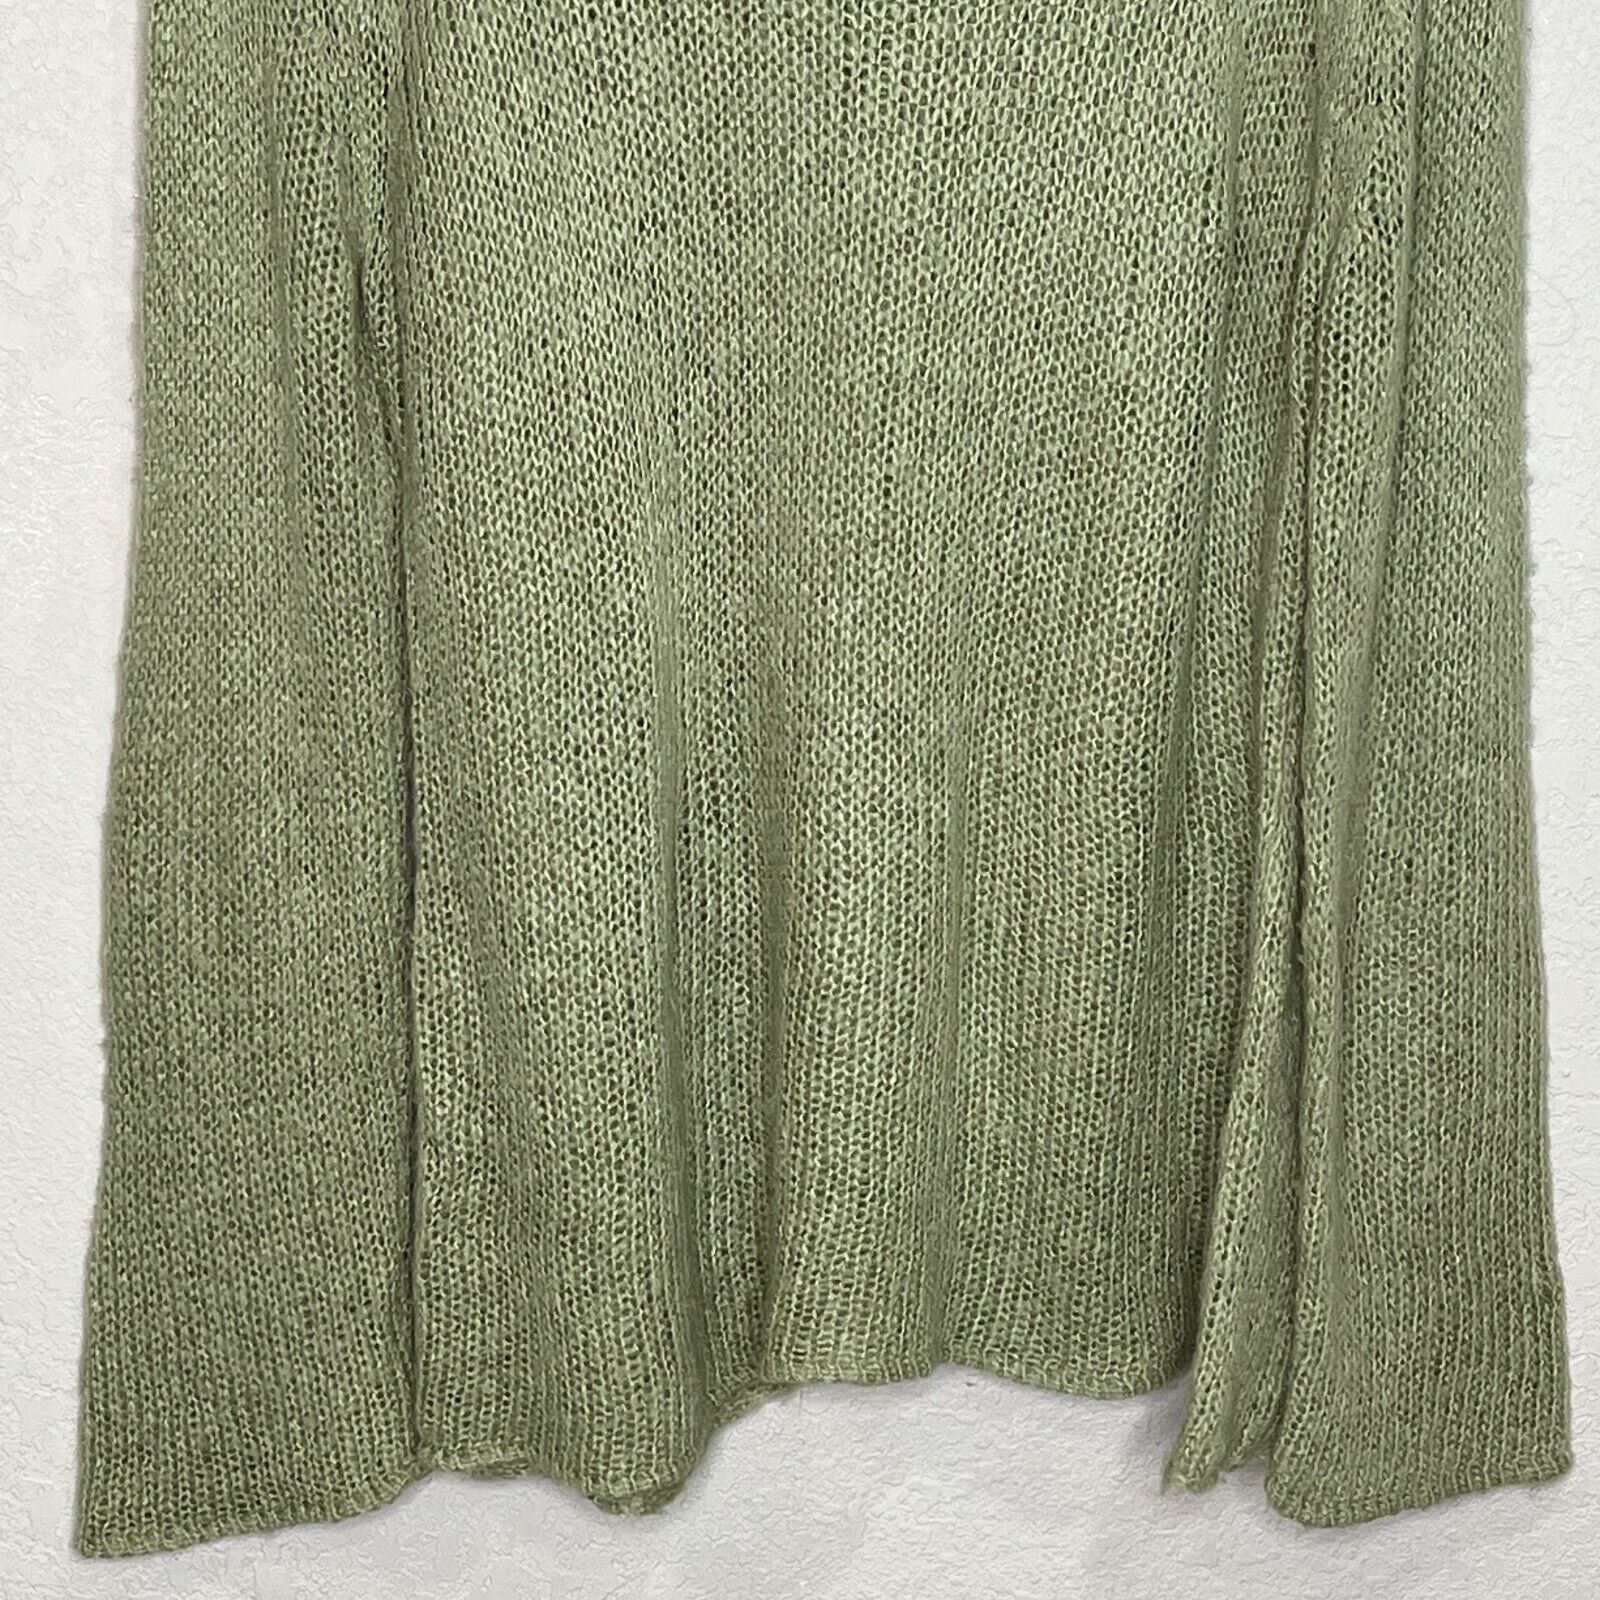 Wooden Ships Green Cowl Neck Sweater Size M / L